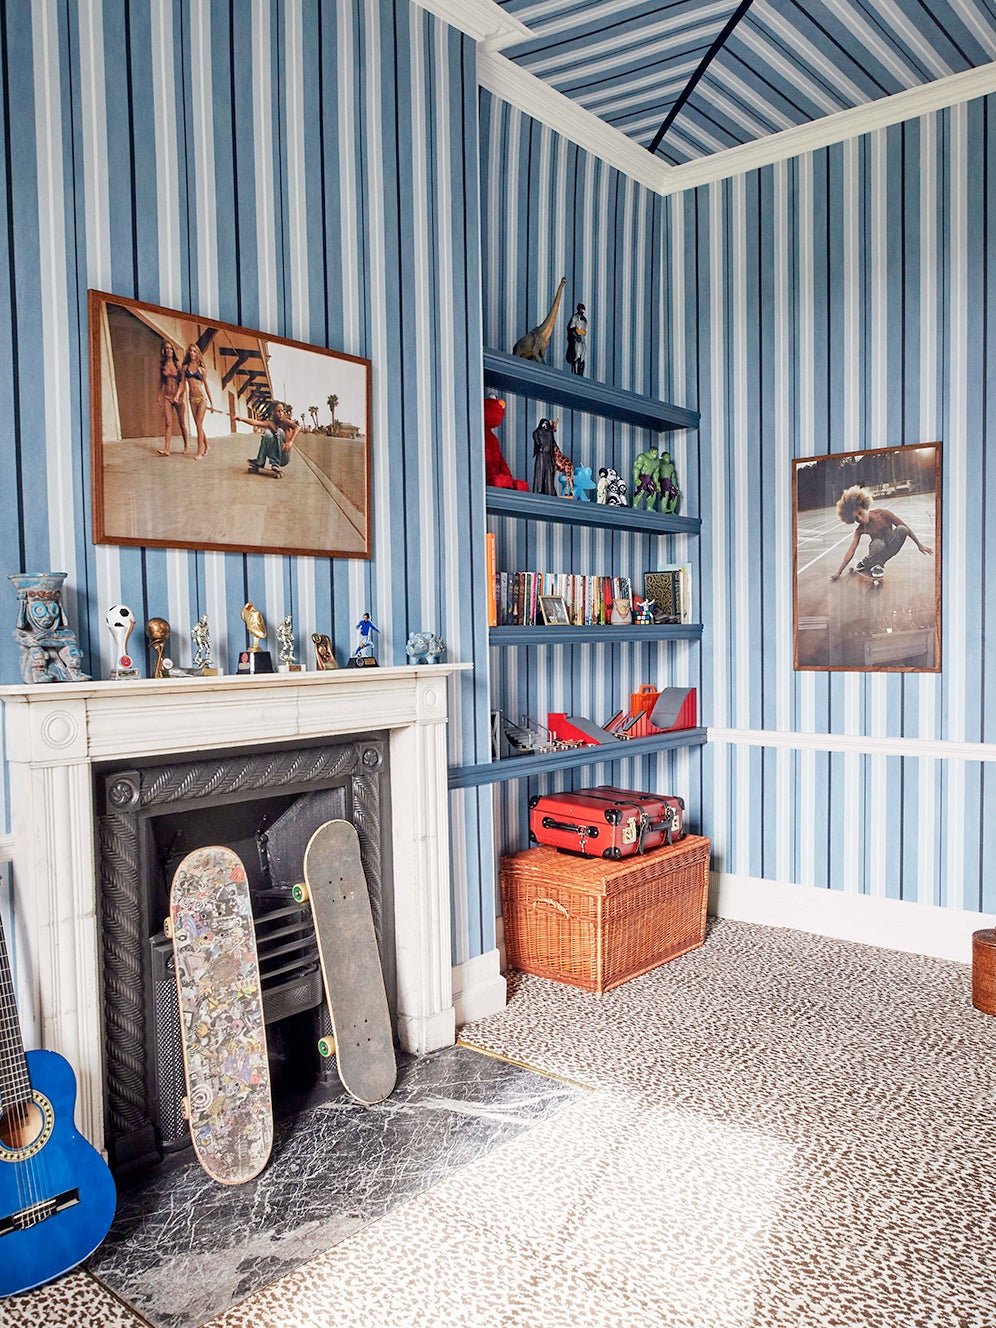 The Castle Next Door Inspired This British Teen’s Stripes-on-Stripes Bedroom